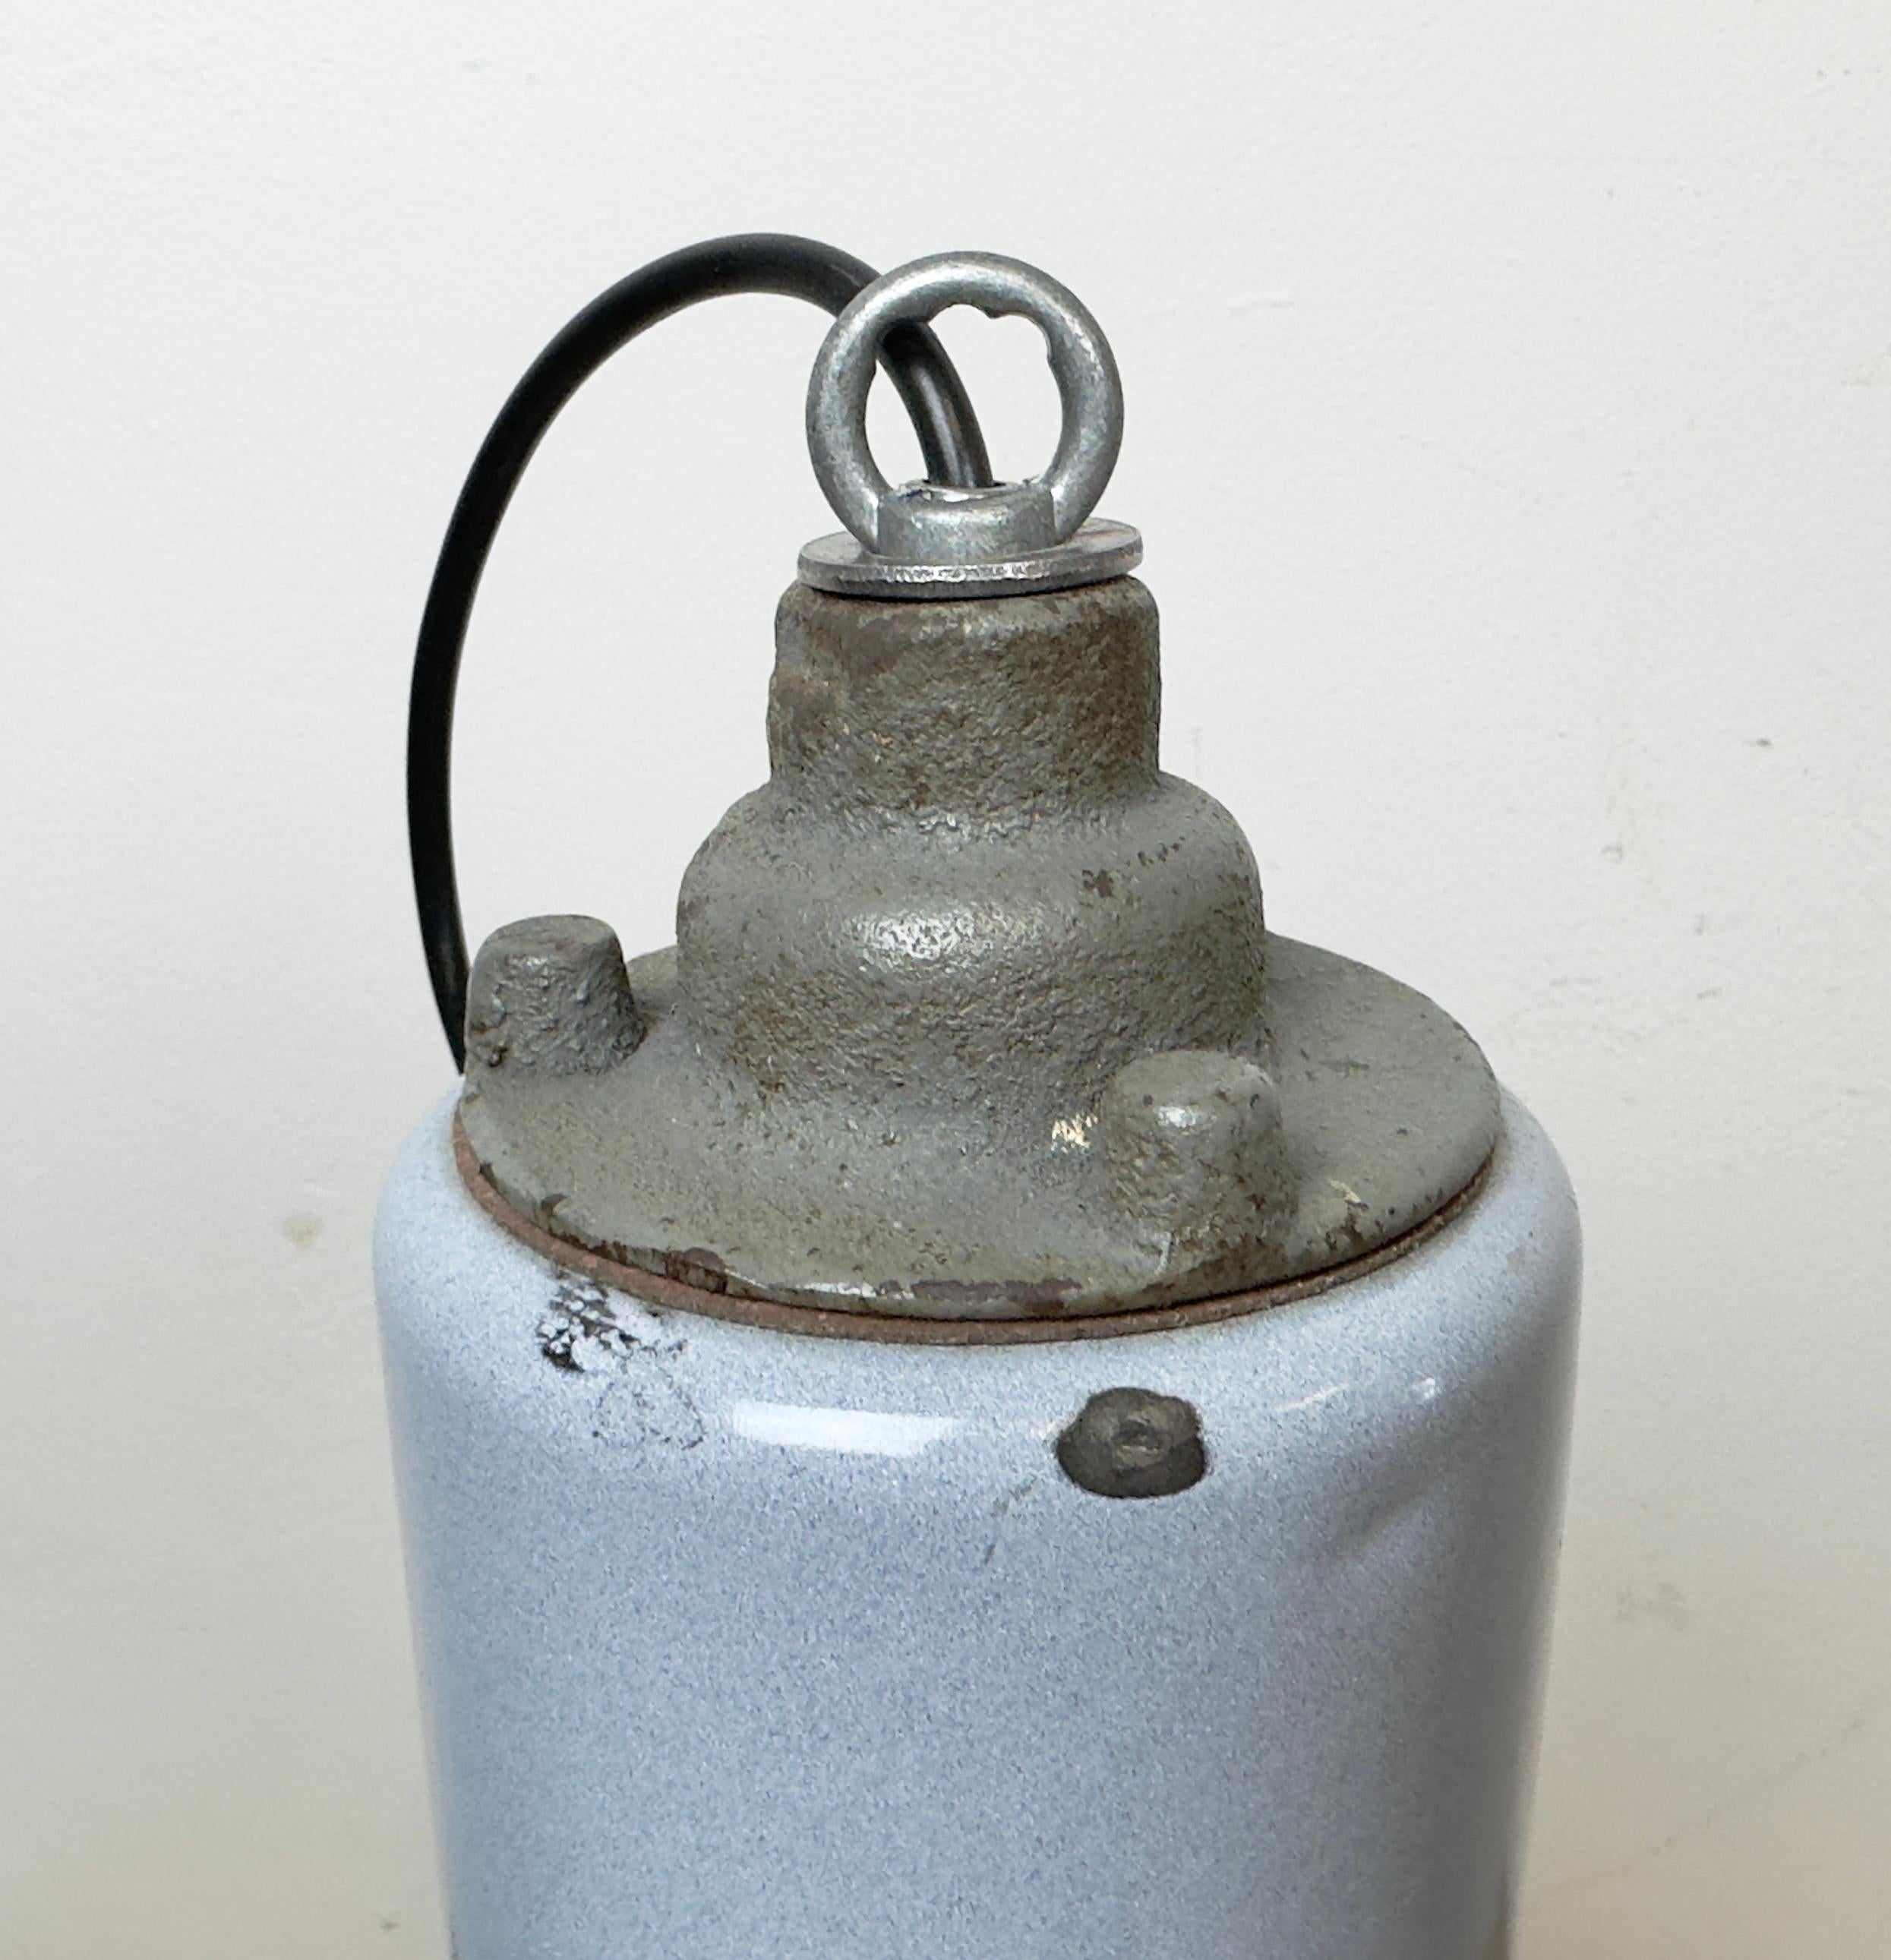 Bauhaus Grey Enamel Industrial Pendant Lamp with Glass Cover, 1950s For Sale 8